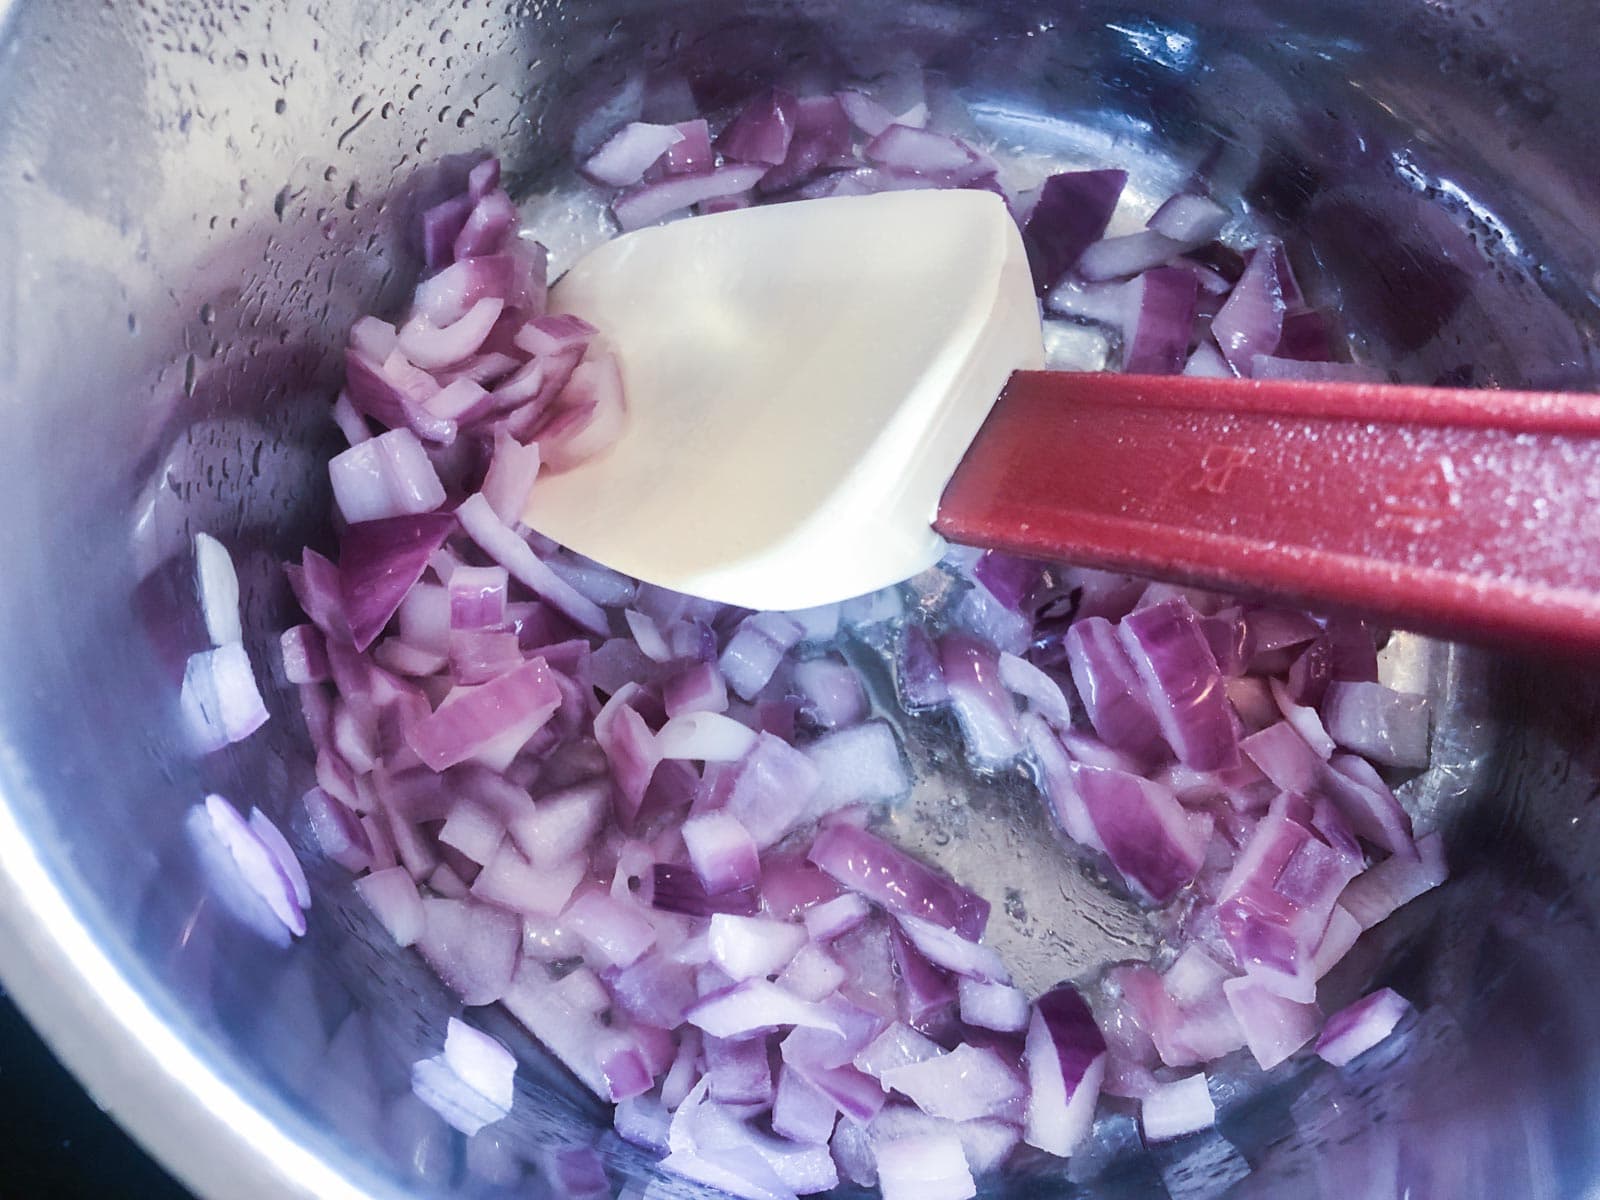 Diced red onions sauteeing in a fry pan.